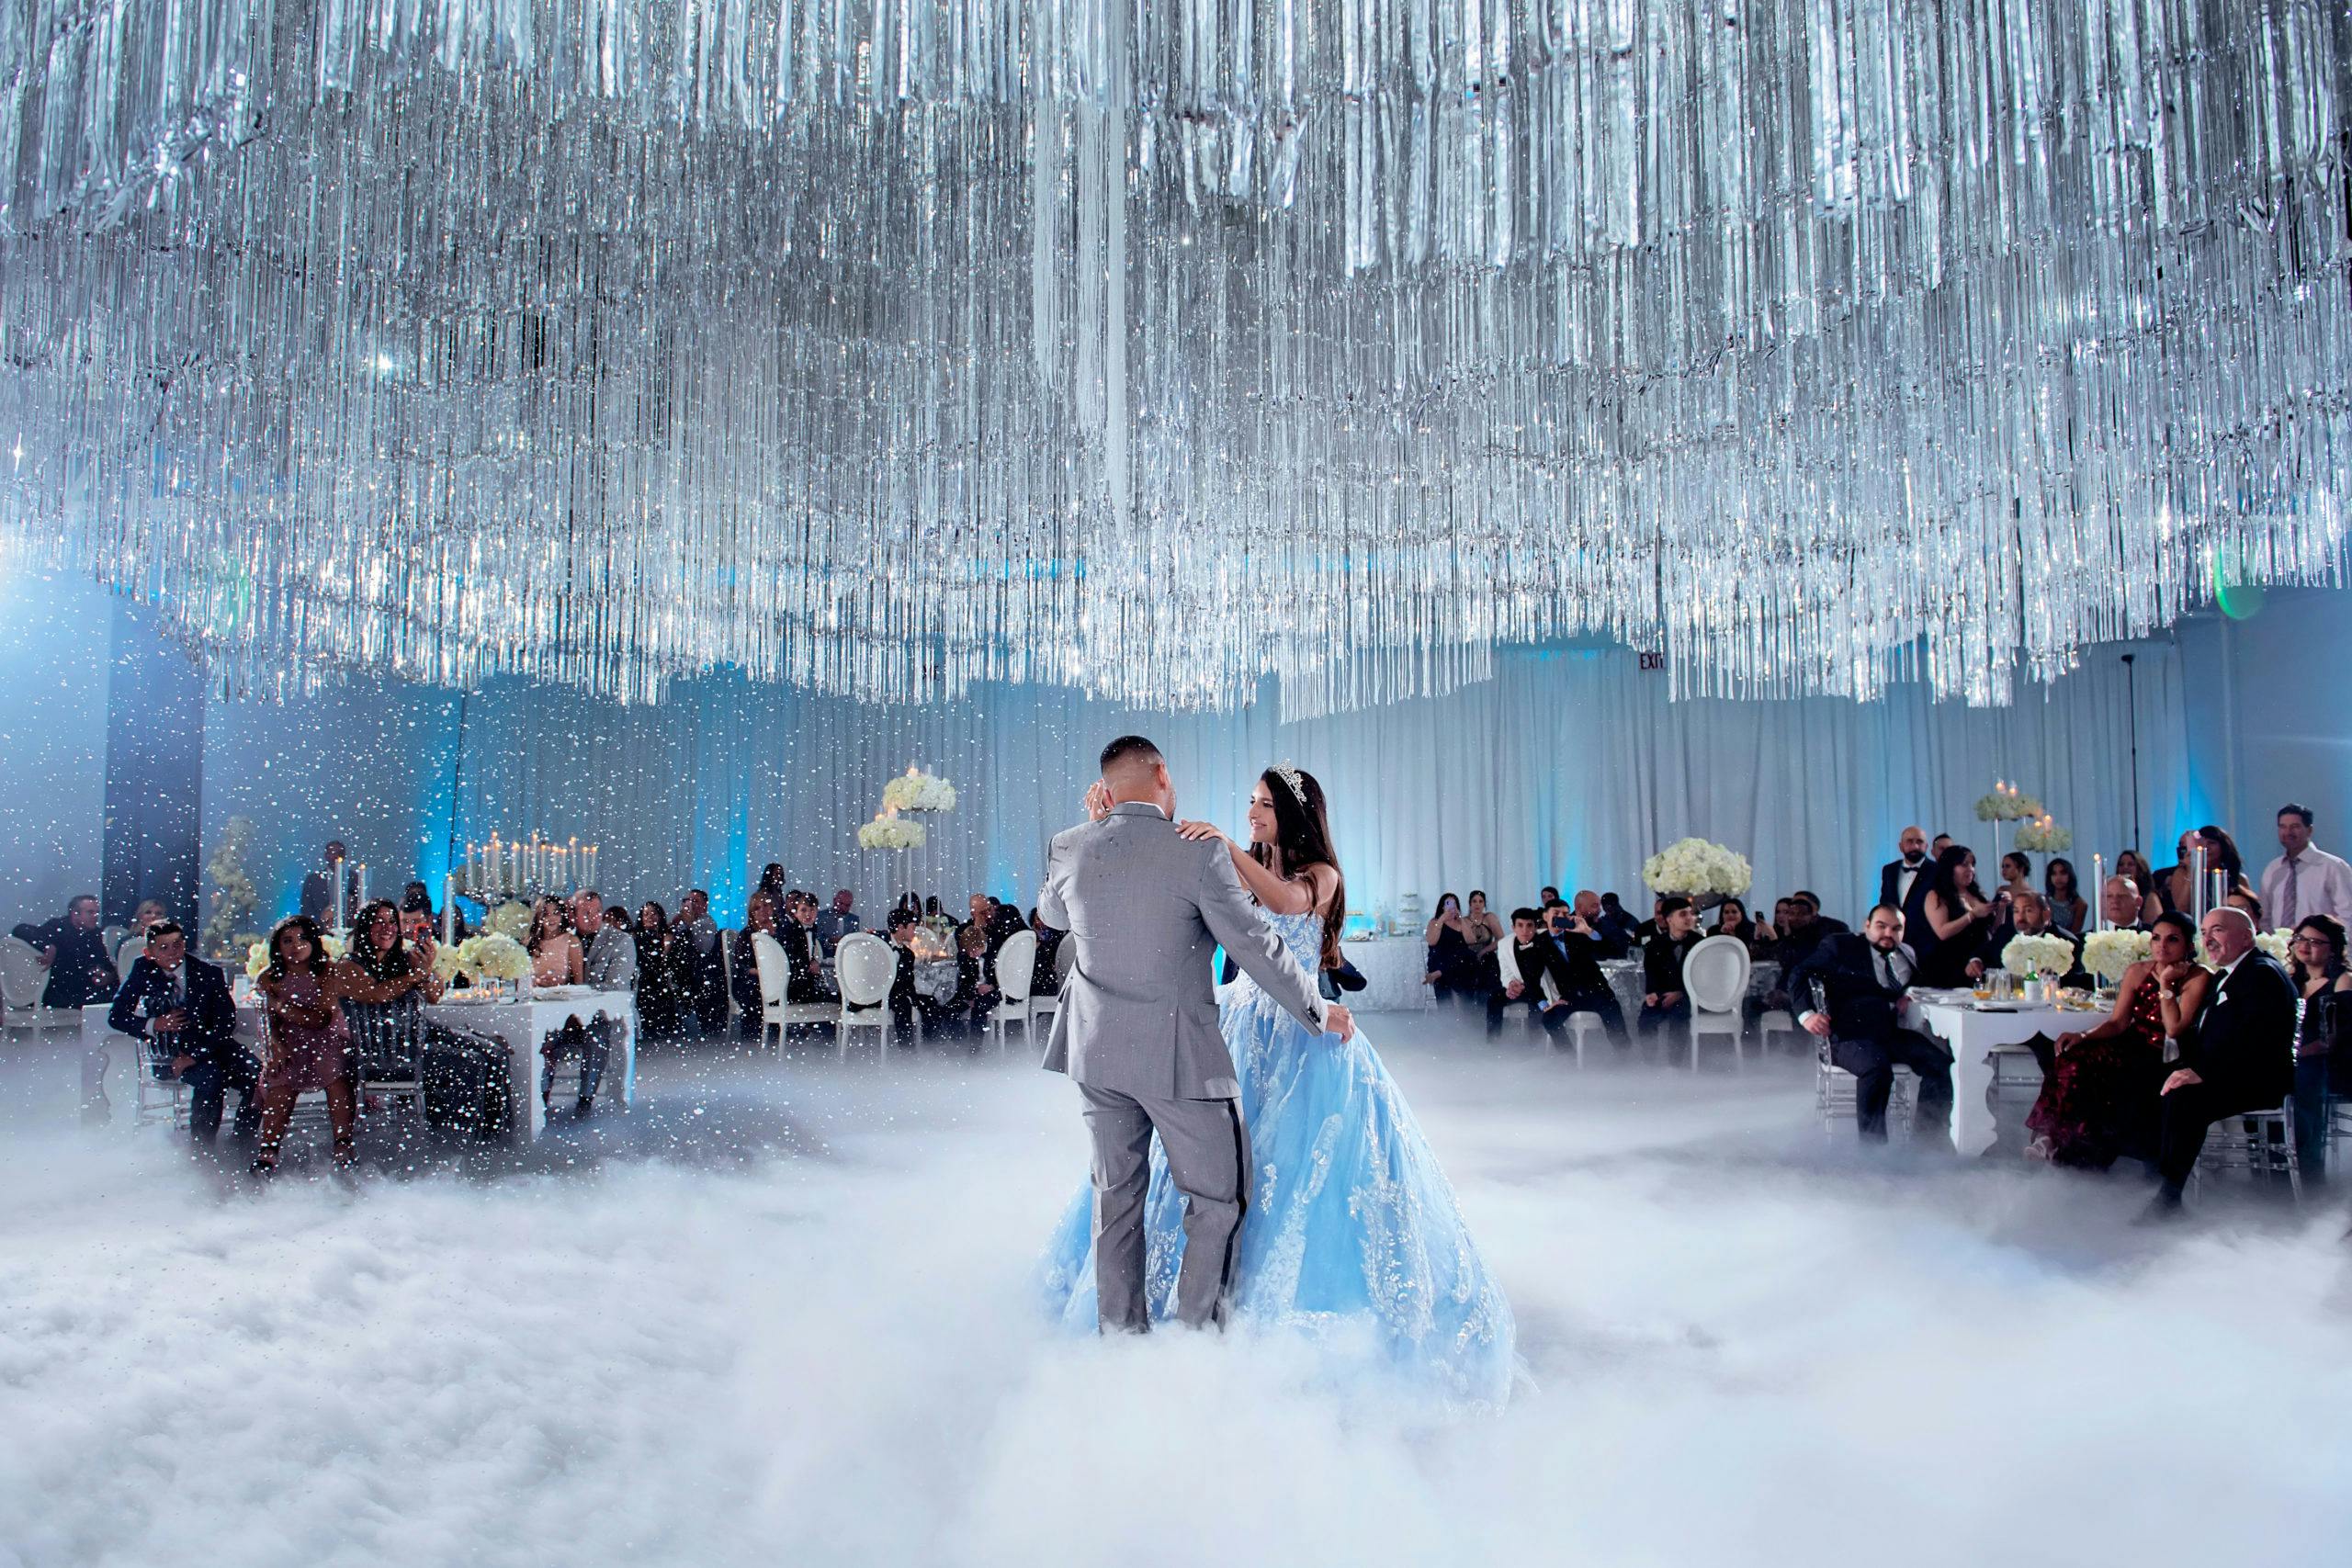 Father and Daughter Dance Through Fog Underneath Crystal Ceiling Installation at Winter Wonderland-Themed Quinceañera | PartySlate